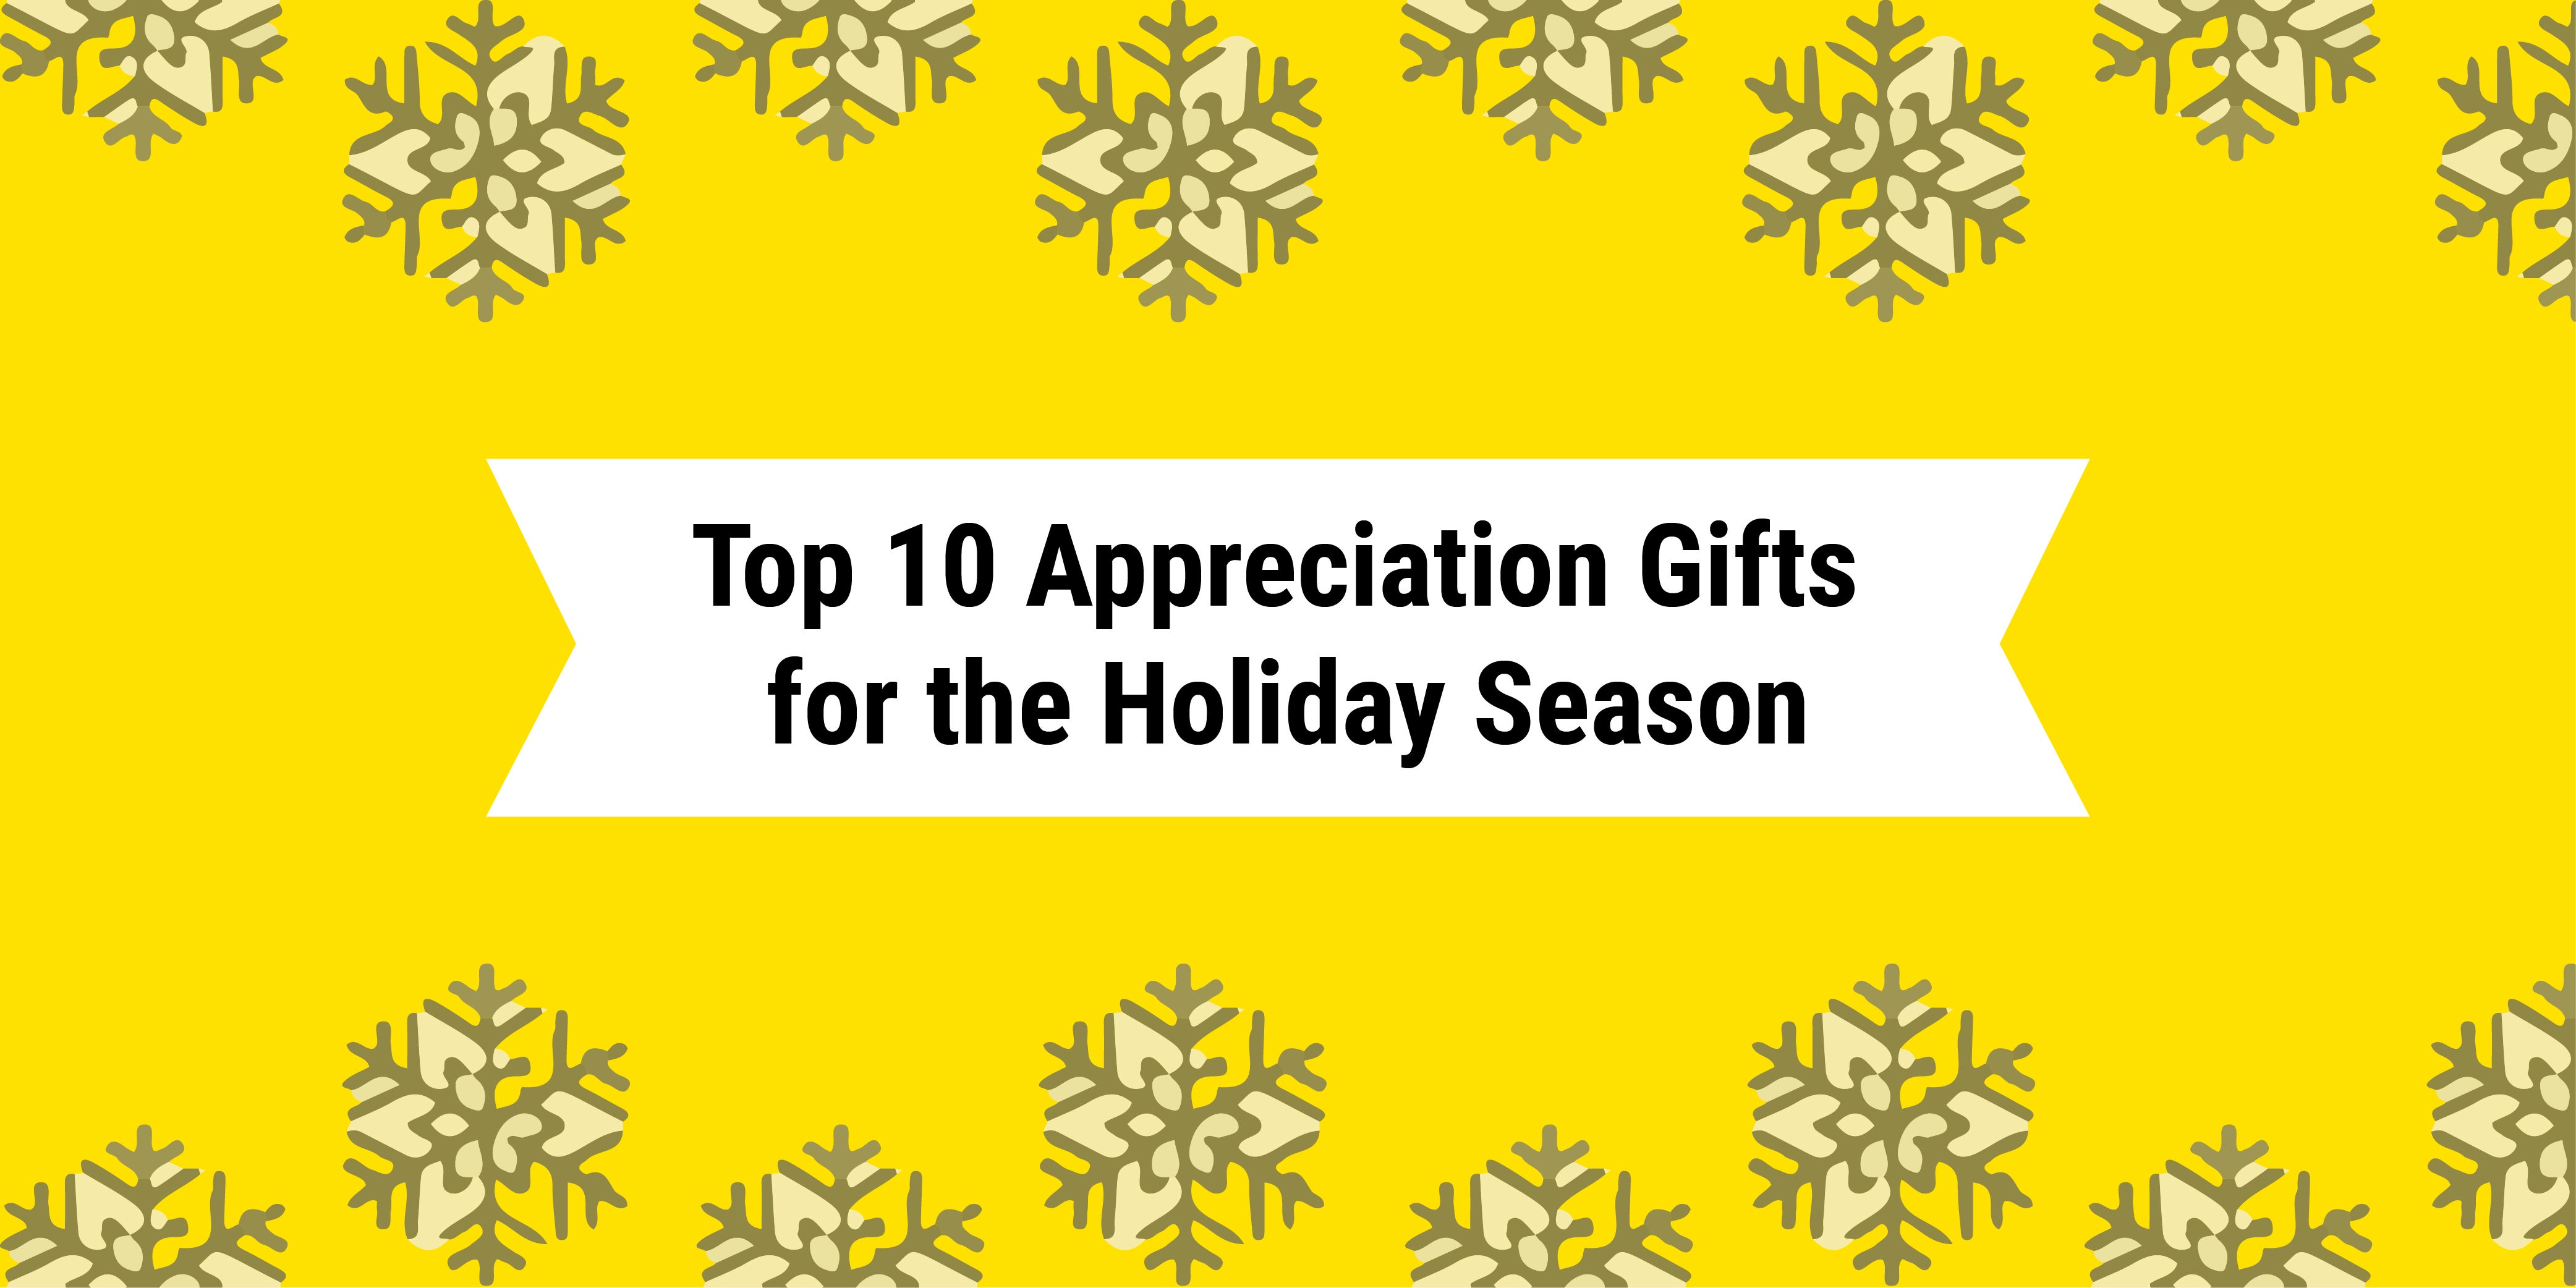 Top 10 Appreciation Gifts for the Holiday Season